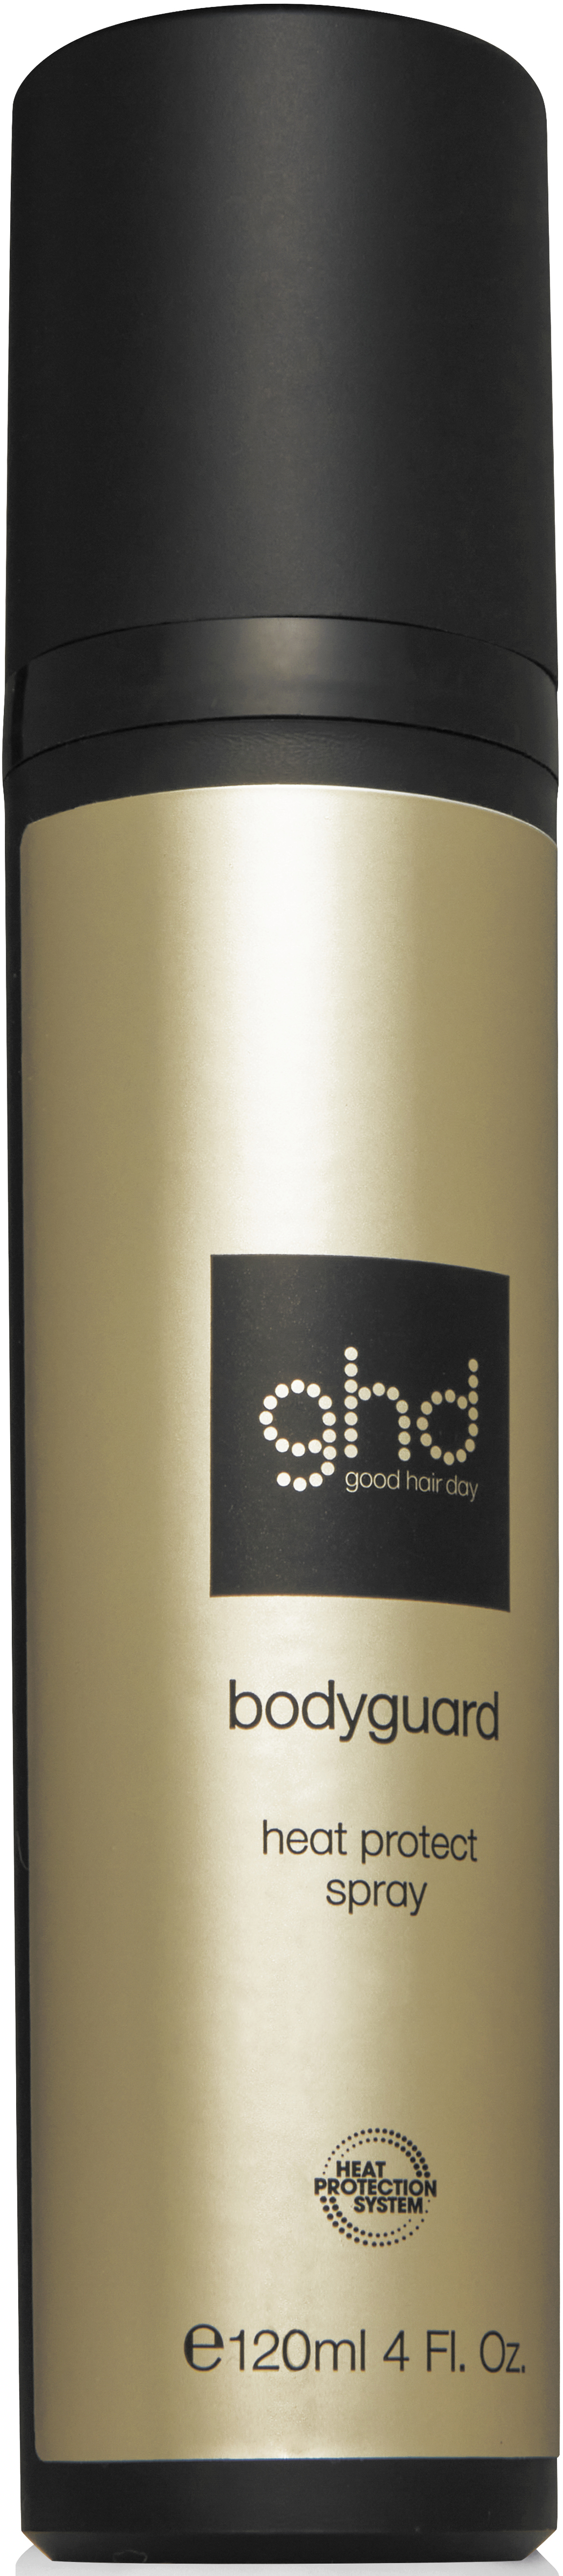 Termoprotettore Ghd Heat Protect Spray 120 ml